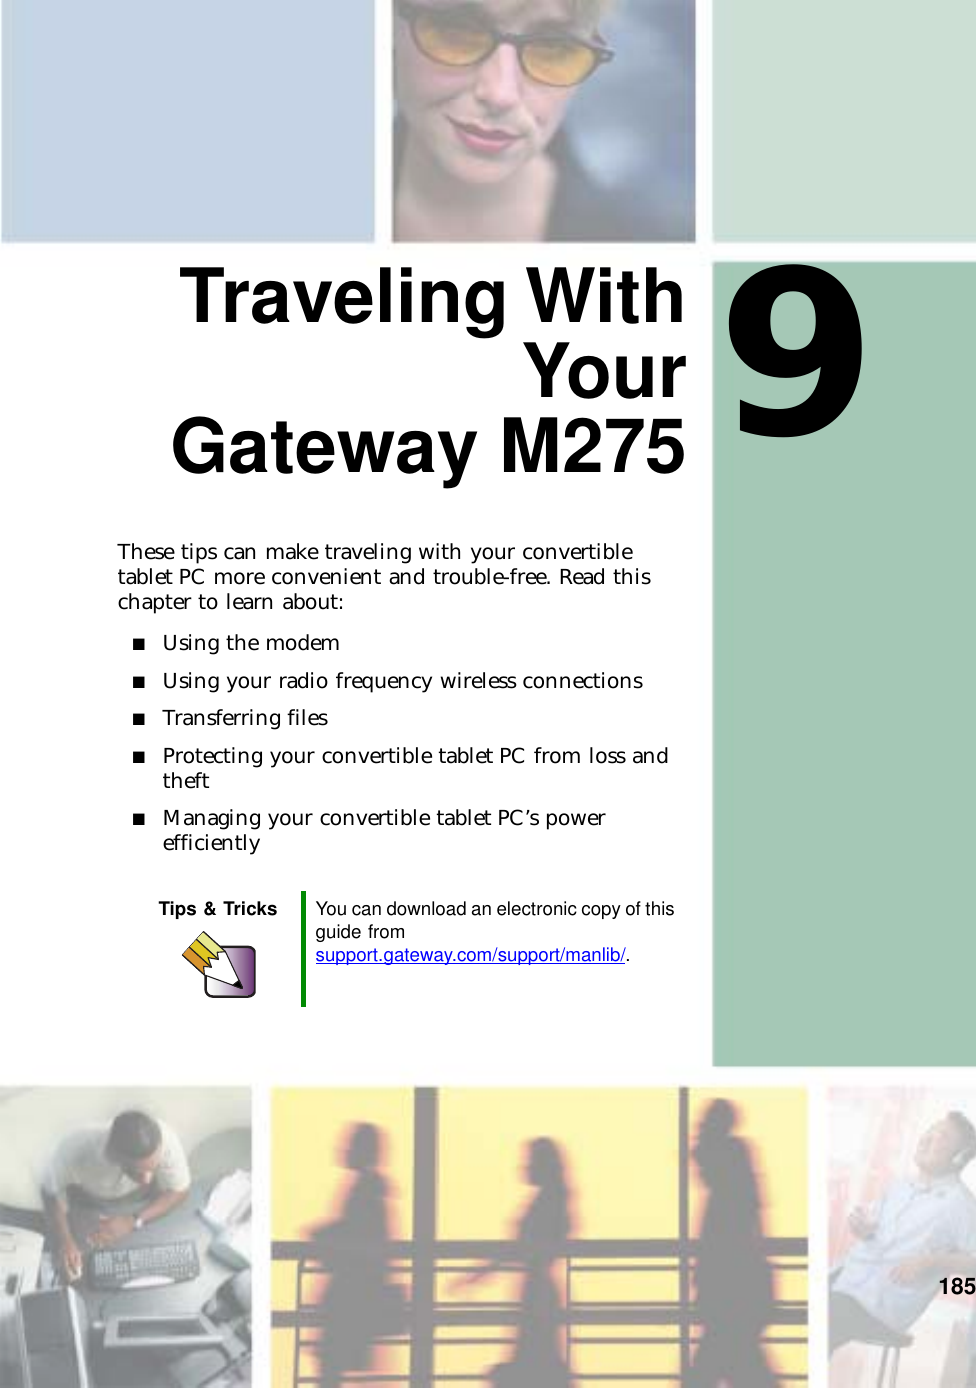 9185Traveling WithYourGateway M275These tips can make traveling with your convertible tablet PC more convenient and trouble-free. Read this chapter to learn about:■Using the modem■Using your radio frequency wireless connections■Transferring files■Protecting your convertible tablet PC from loss and theft■Managing your convertible tablet PC’s power efficientlyTips &amp; Tricks You can download an electronic copy of this guide from support.gateway.com/support/manlib/.